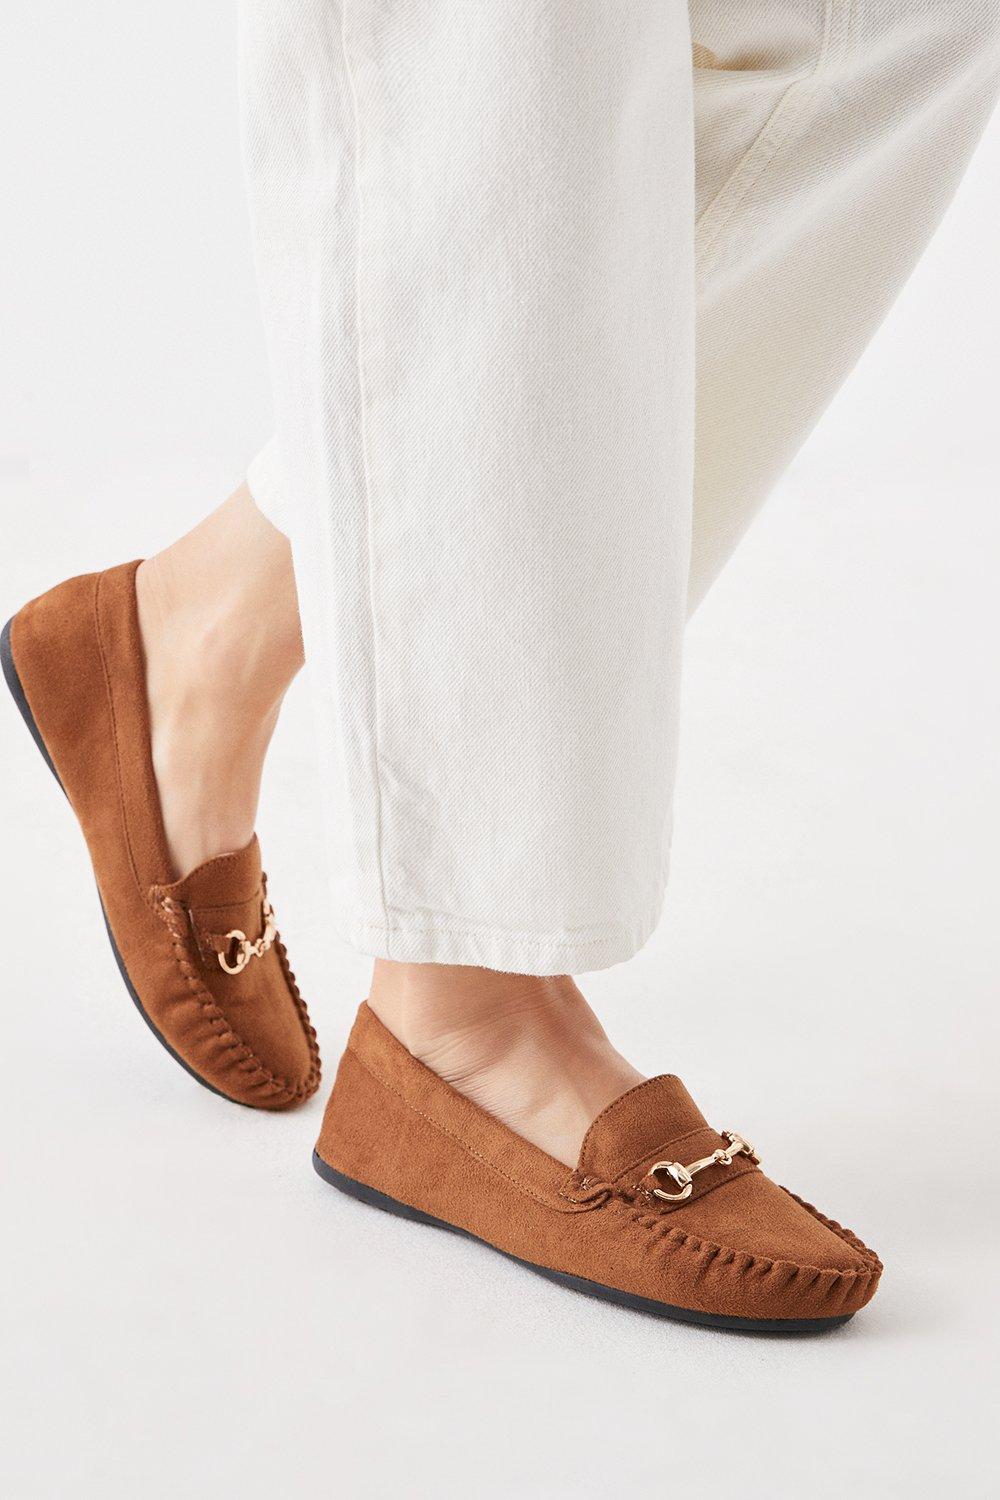 Womens Good For The Sole: Nina Comfort Moccasin Loafers